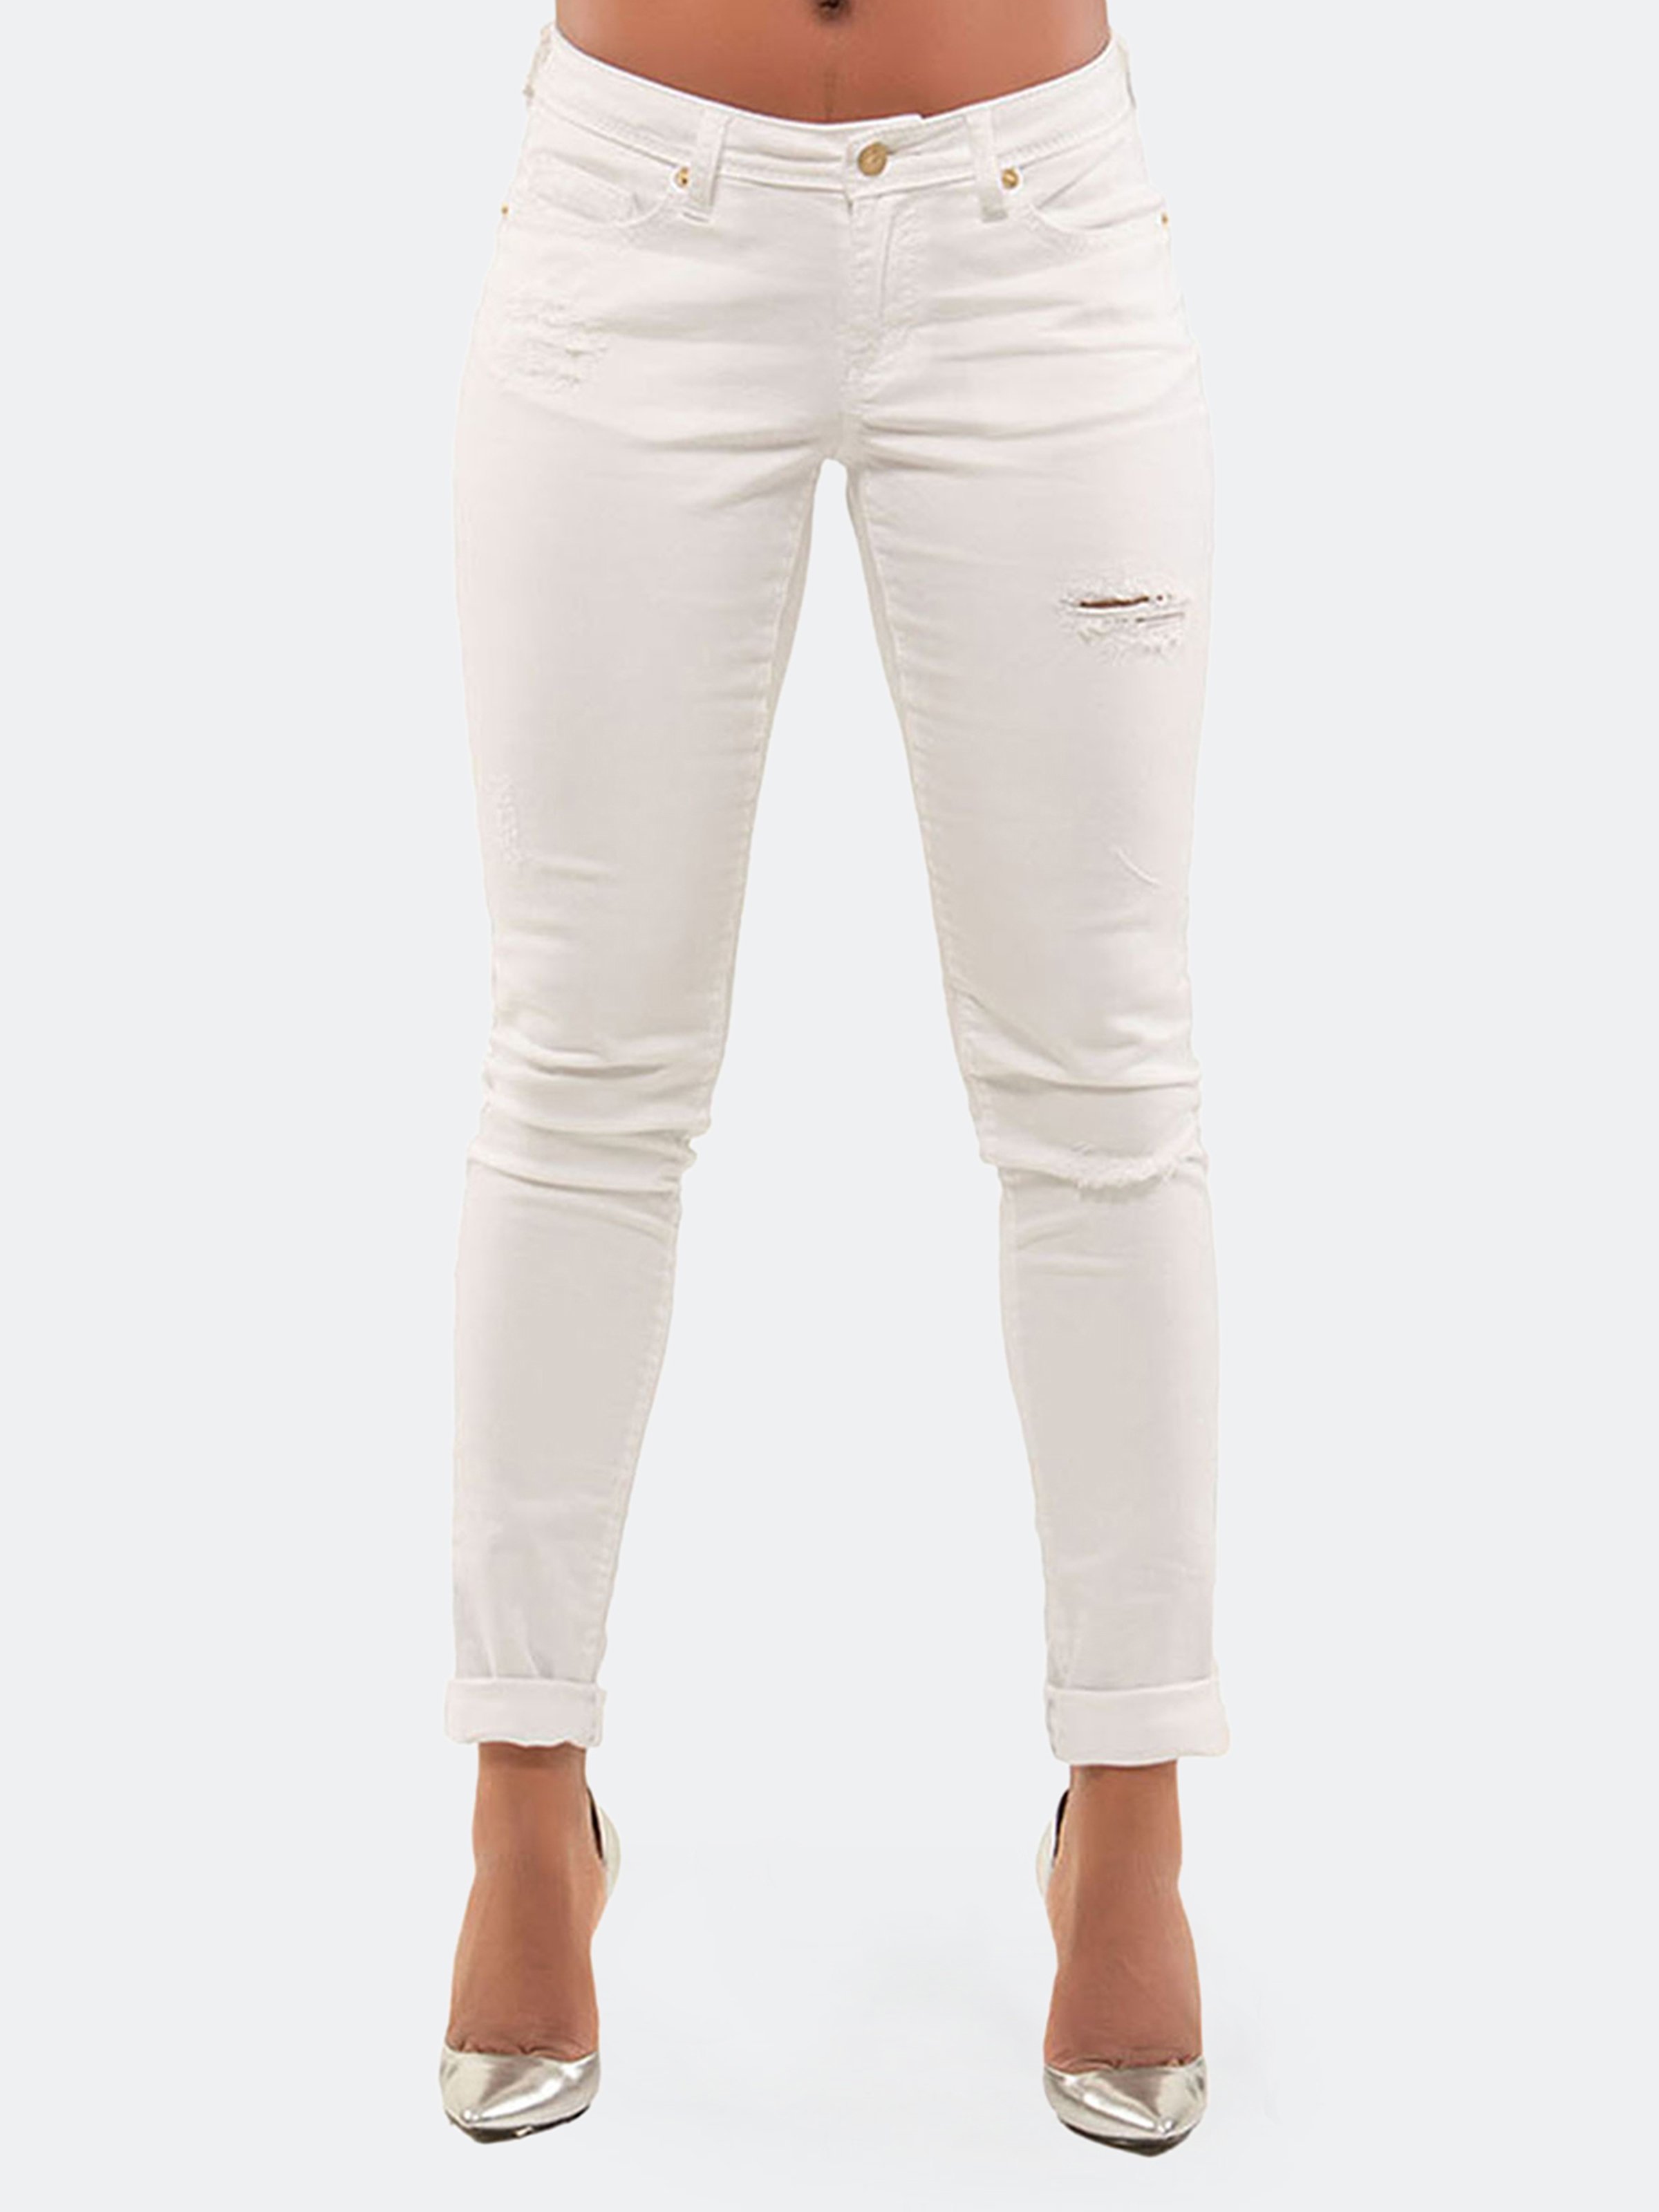 justice white jeans